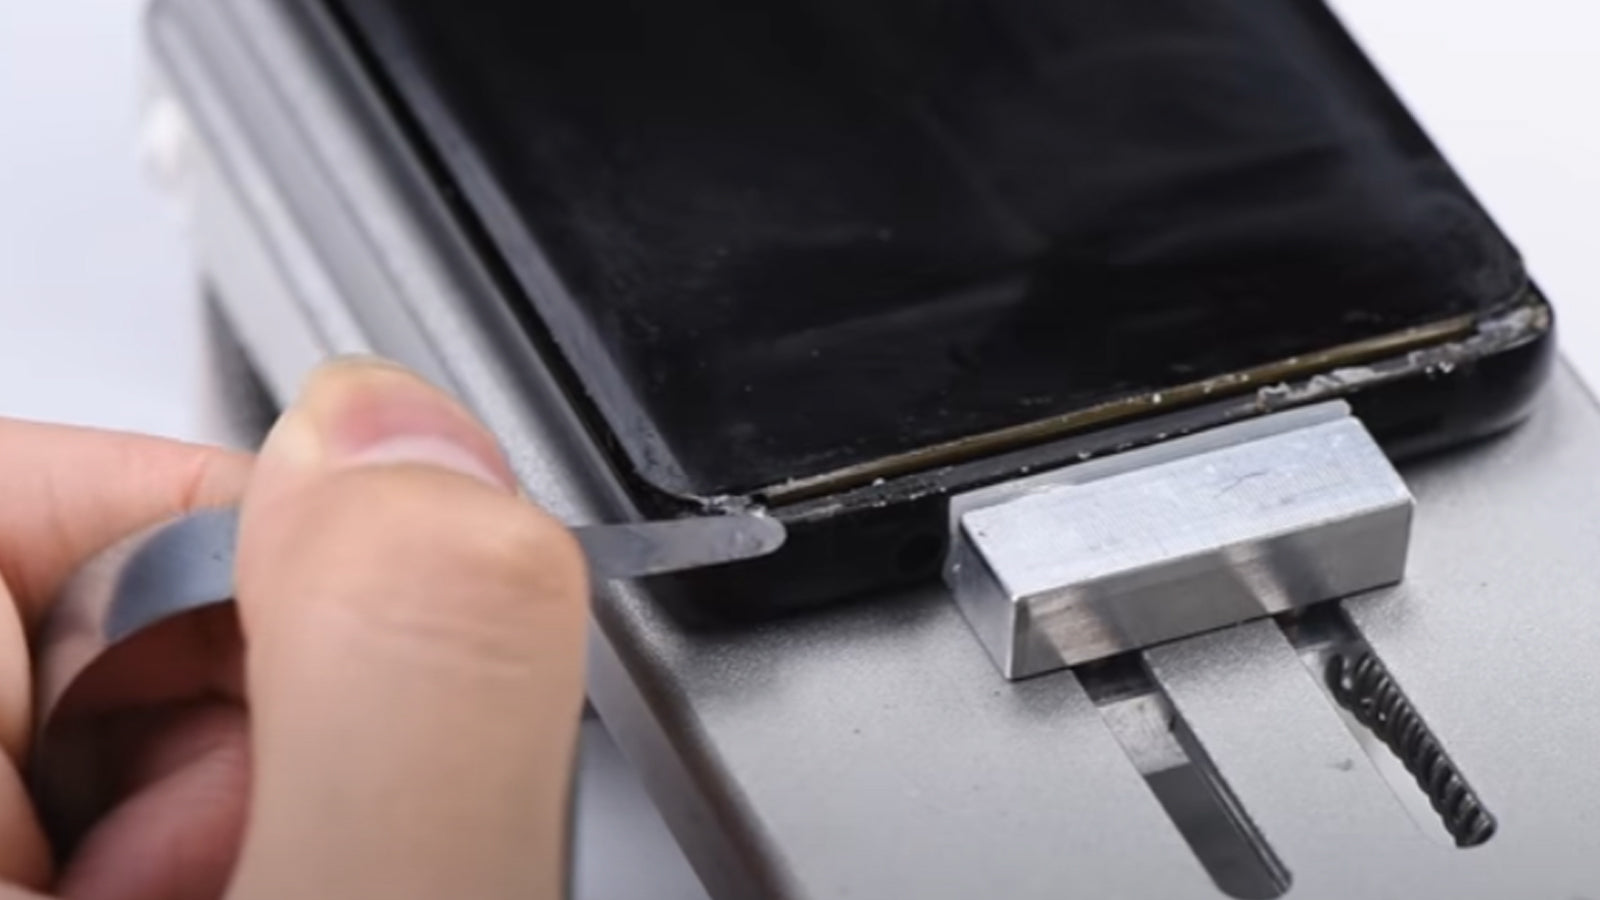 3 steps to separate the Edge LCD screen